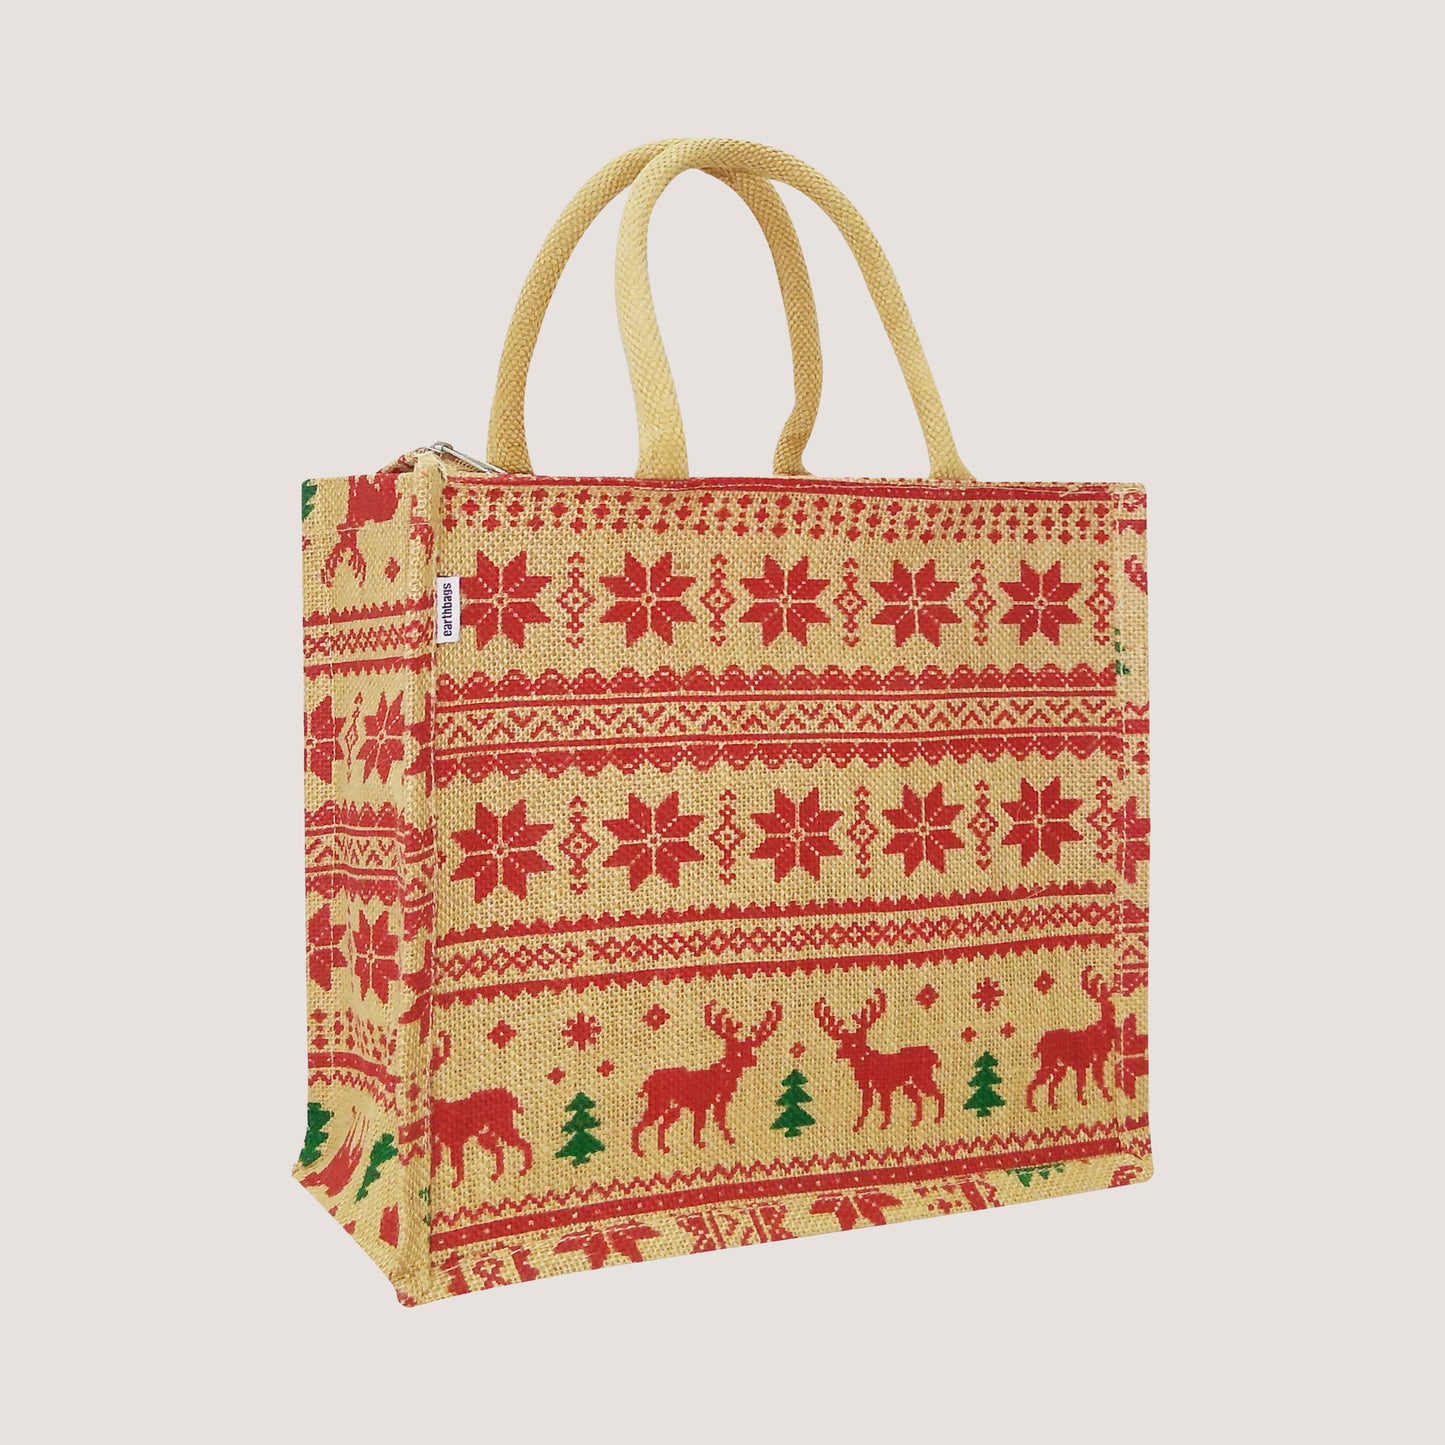 EARTHBAGS WINTER WONDERLAND LUNCH BAG IN BEIGE & RED WITH ZIPPER